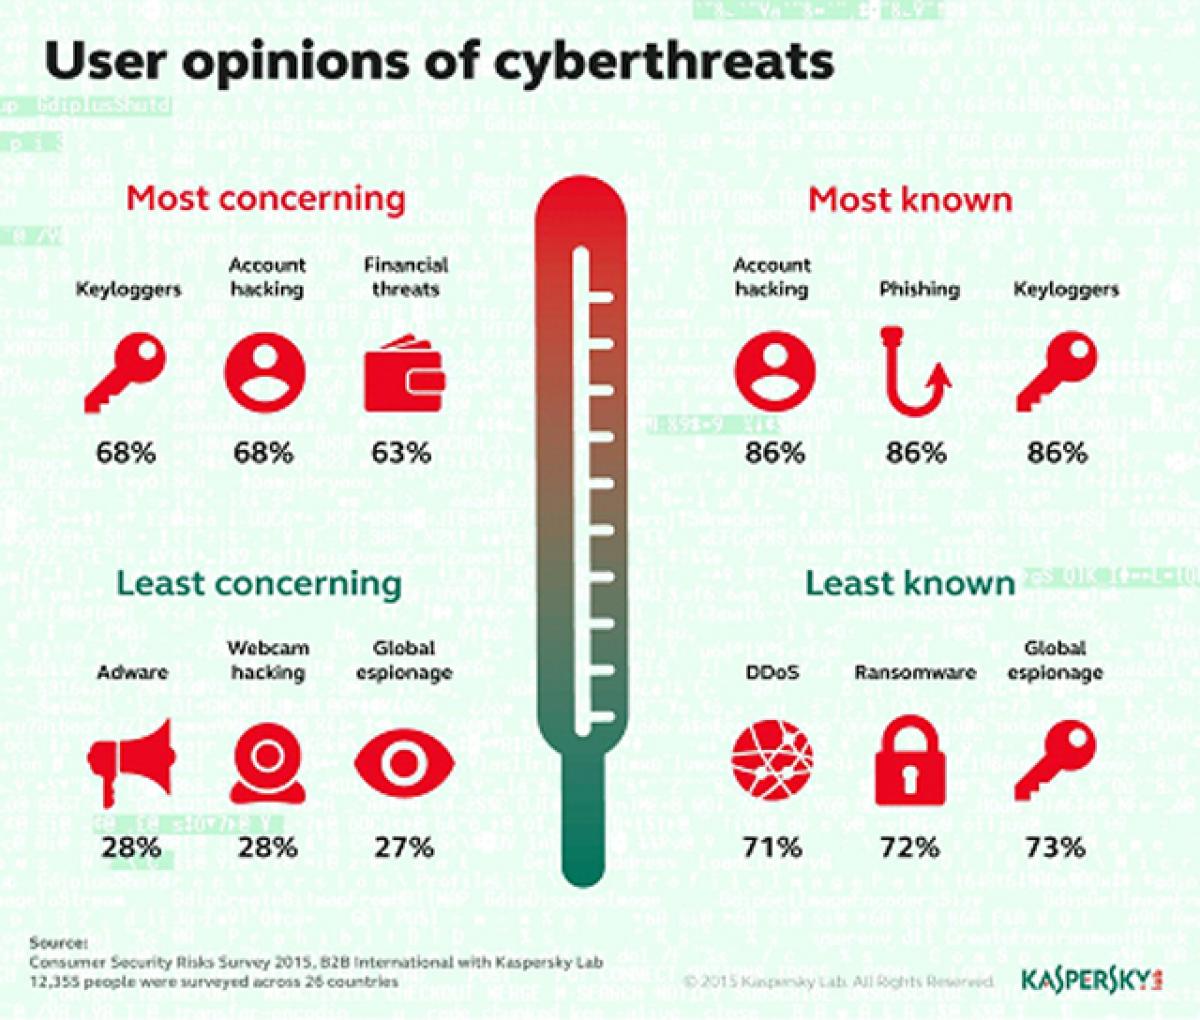 Online Account Theft the Most Feared Cyberthreat among Users: Kaspersky Lab findings